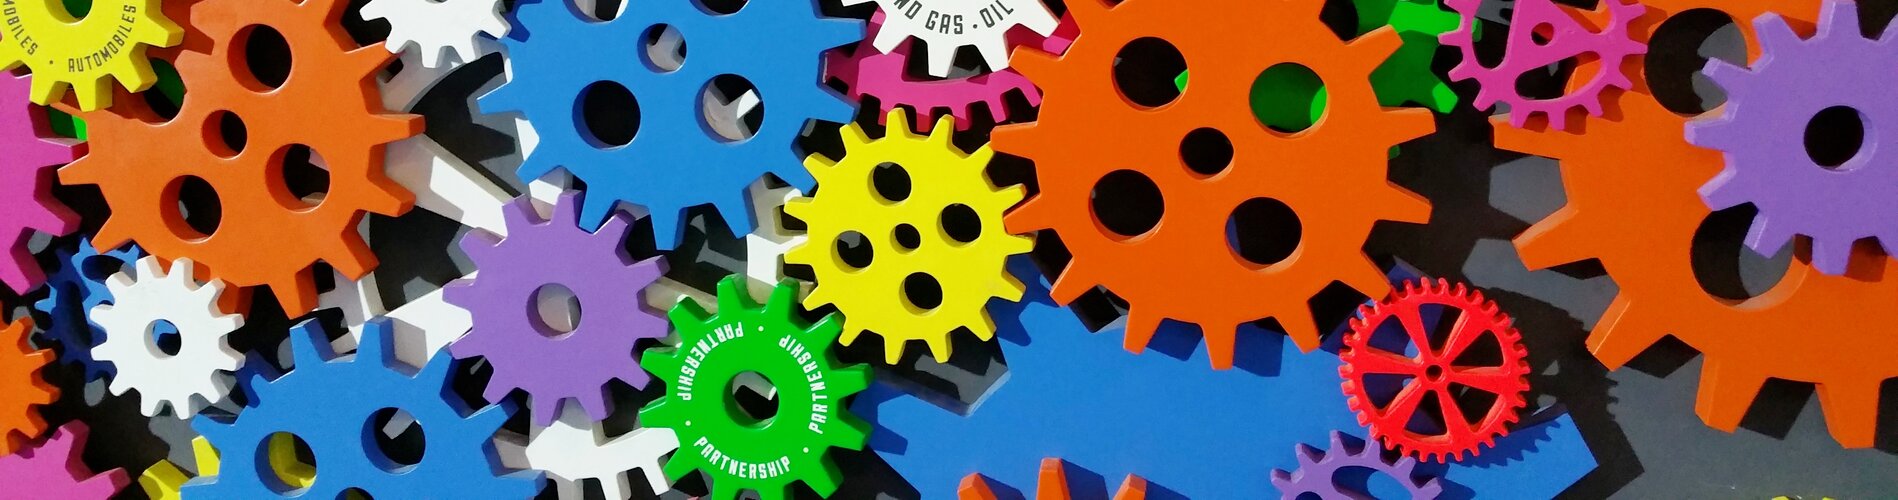 Colourful cogs